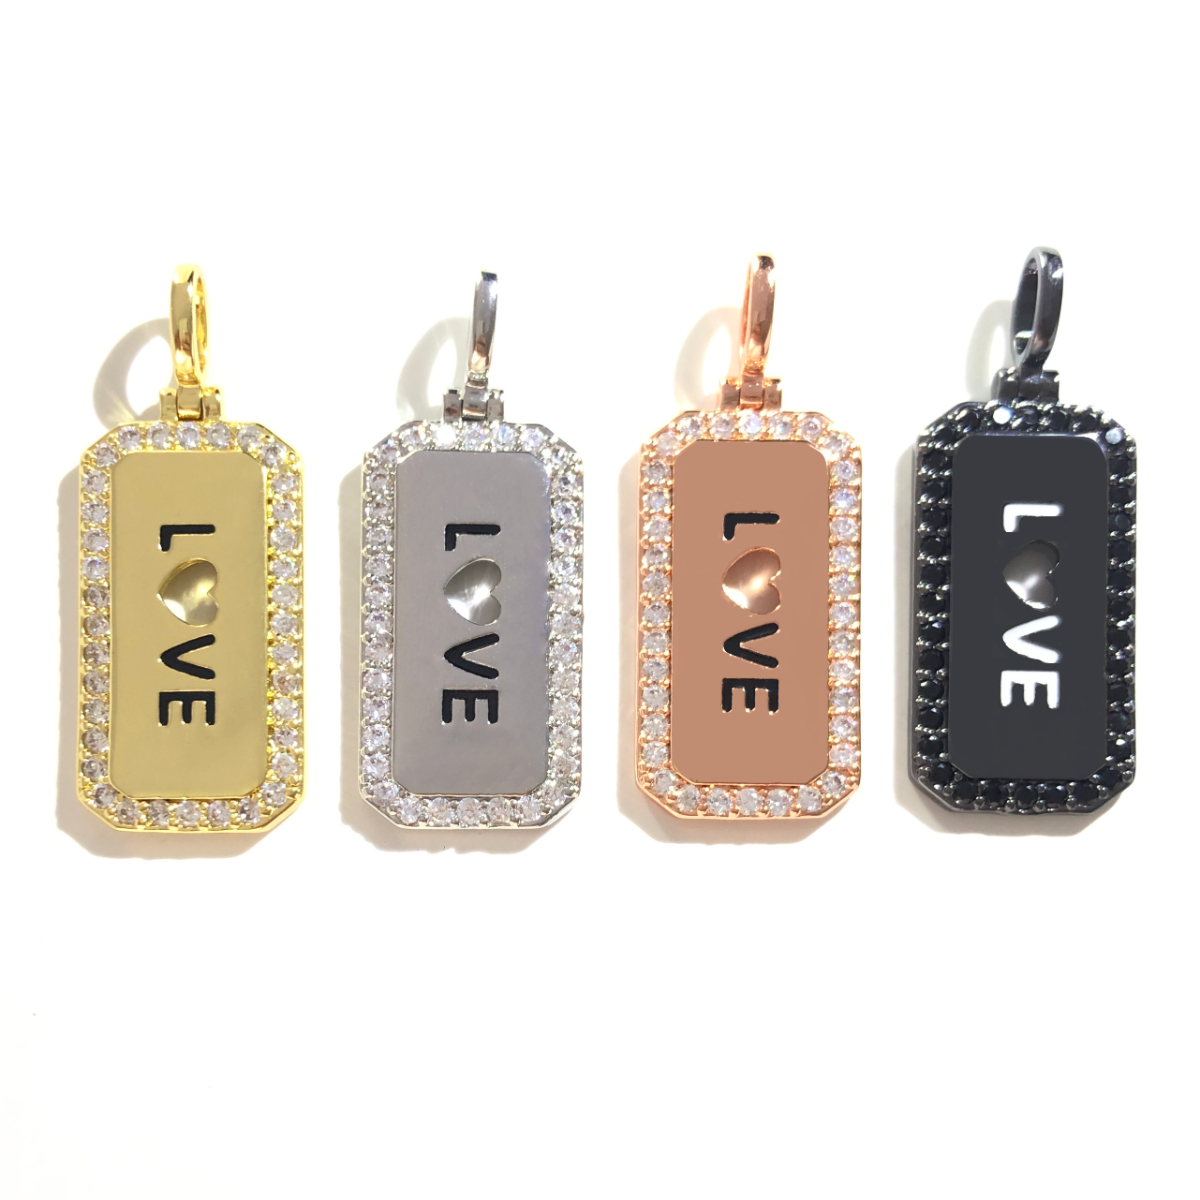 10pcs/lot 38*15mm CZ Paved Love Word Tags Charms Pendants Mix Colors CZ Paved Charms Christian Quotes New Charms Arrivals Word Tags Charms Beads Beyond